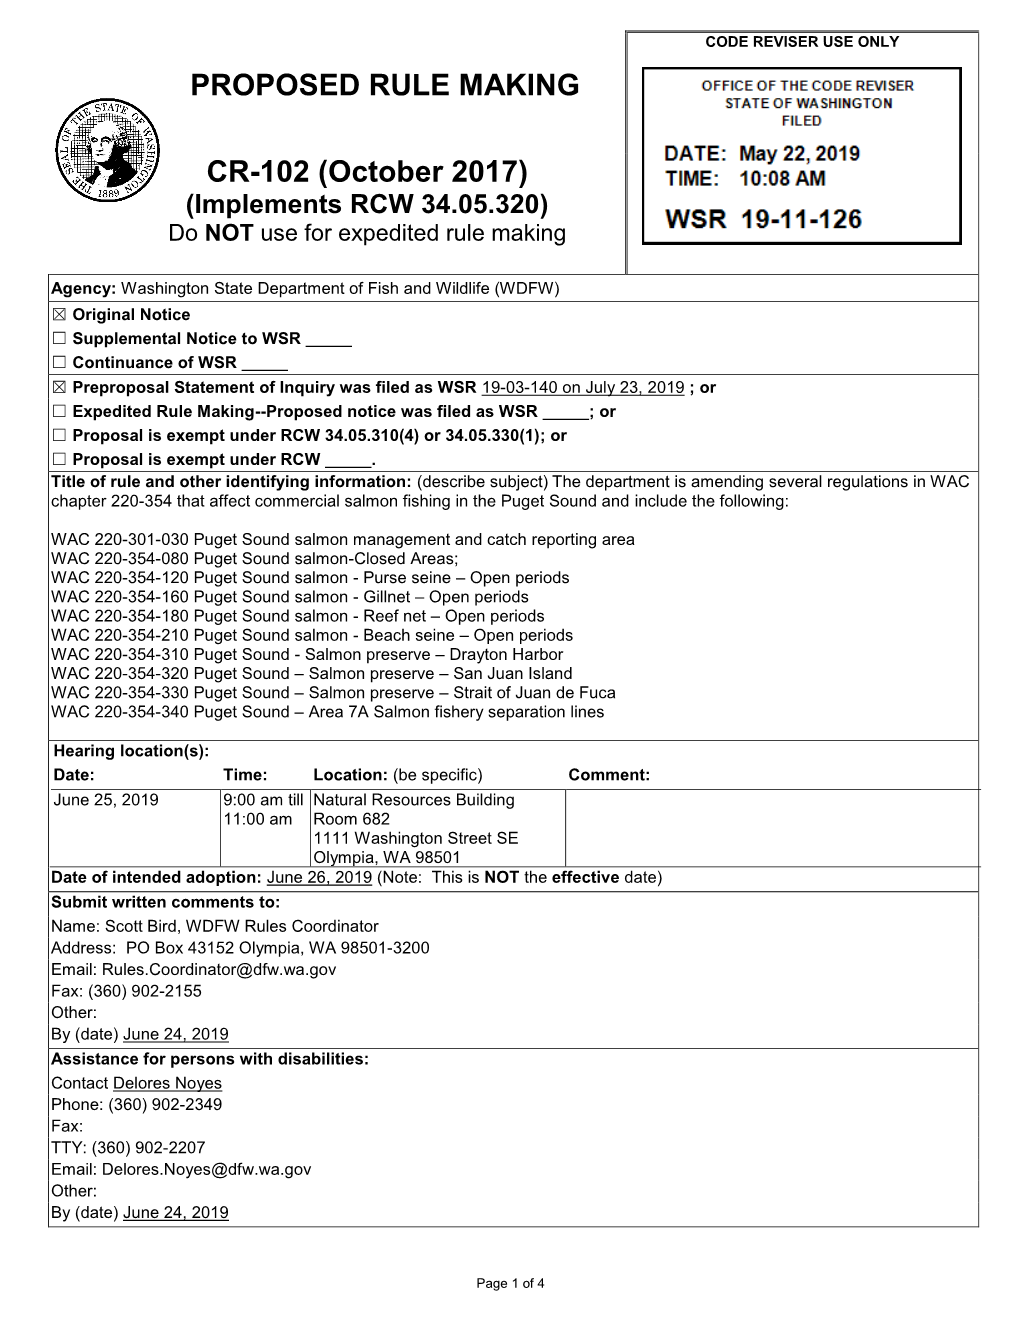 CR-102 (October 2017) (Implements RCW 34.05.320) Do NOT Use for Expedited Rule Making